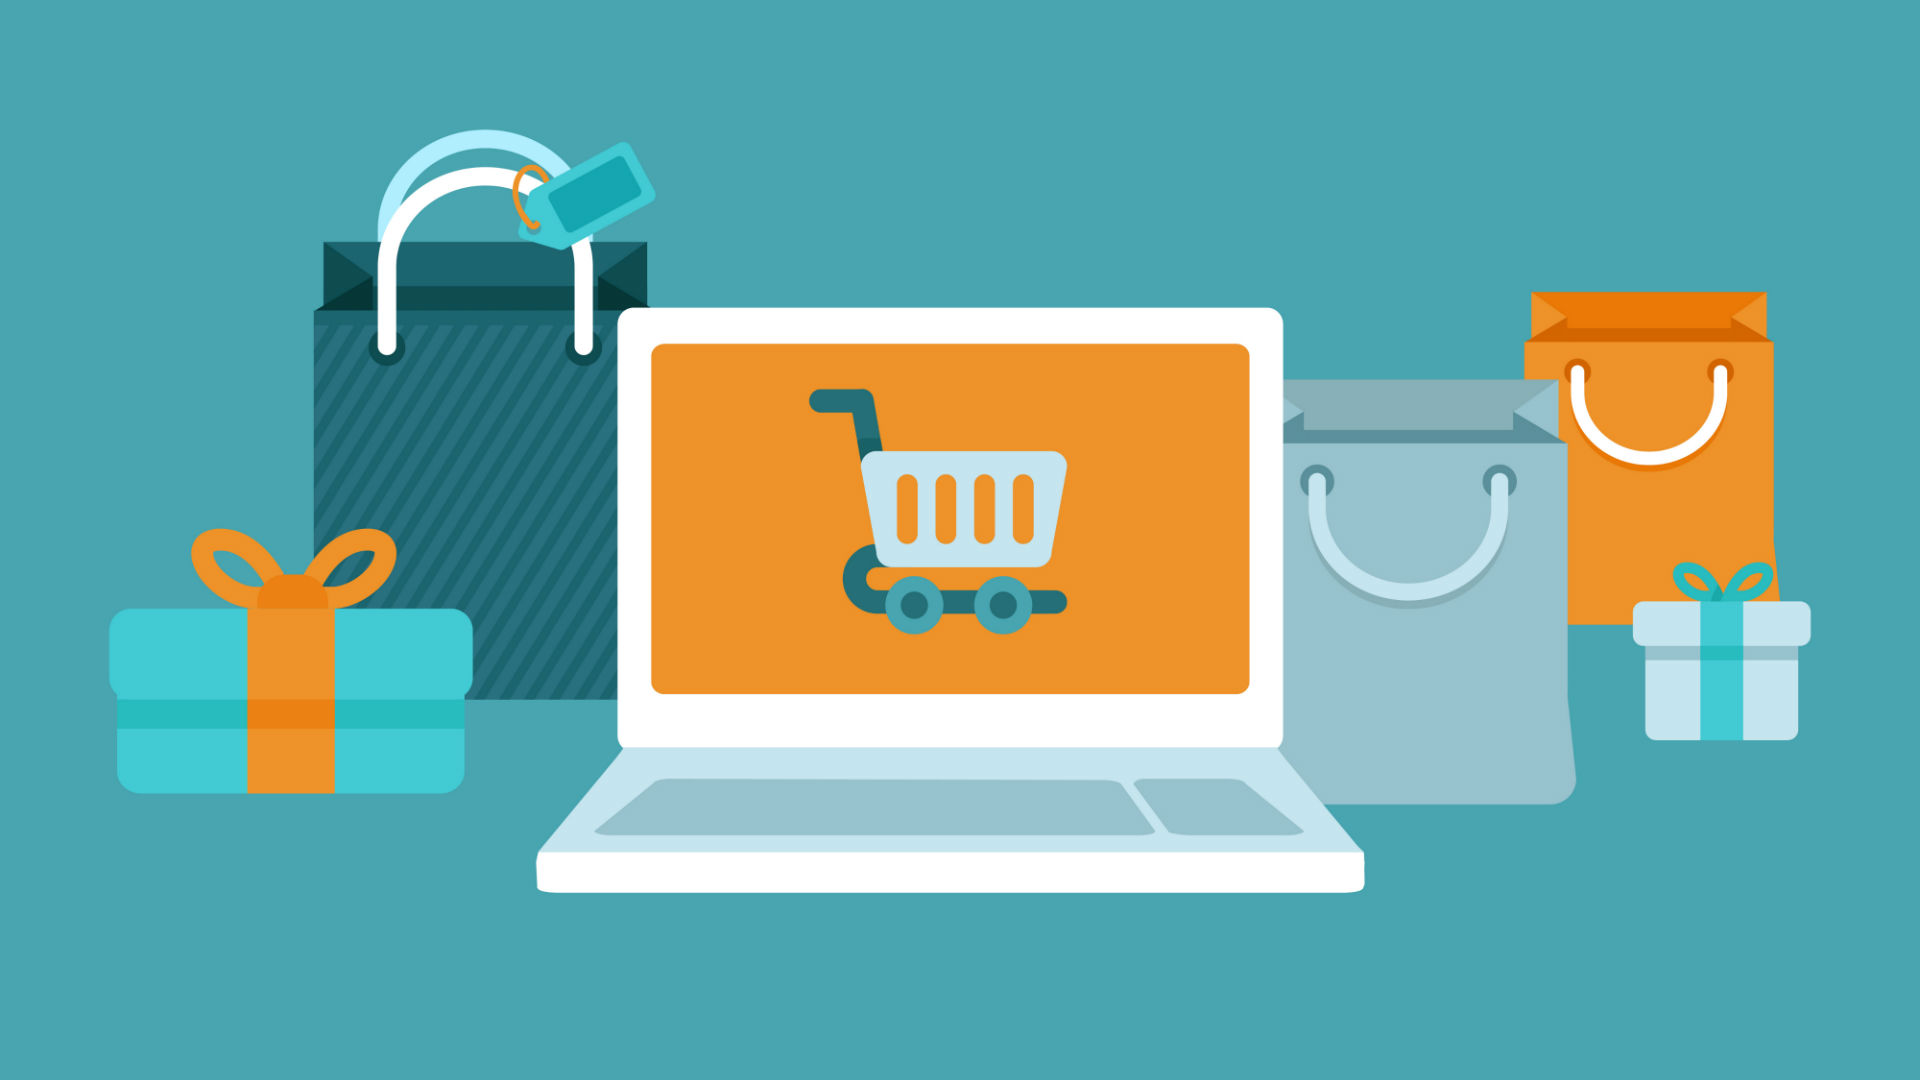 7 E-commerce SEO Trends we’re seeing in 2016